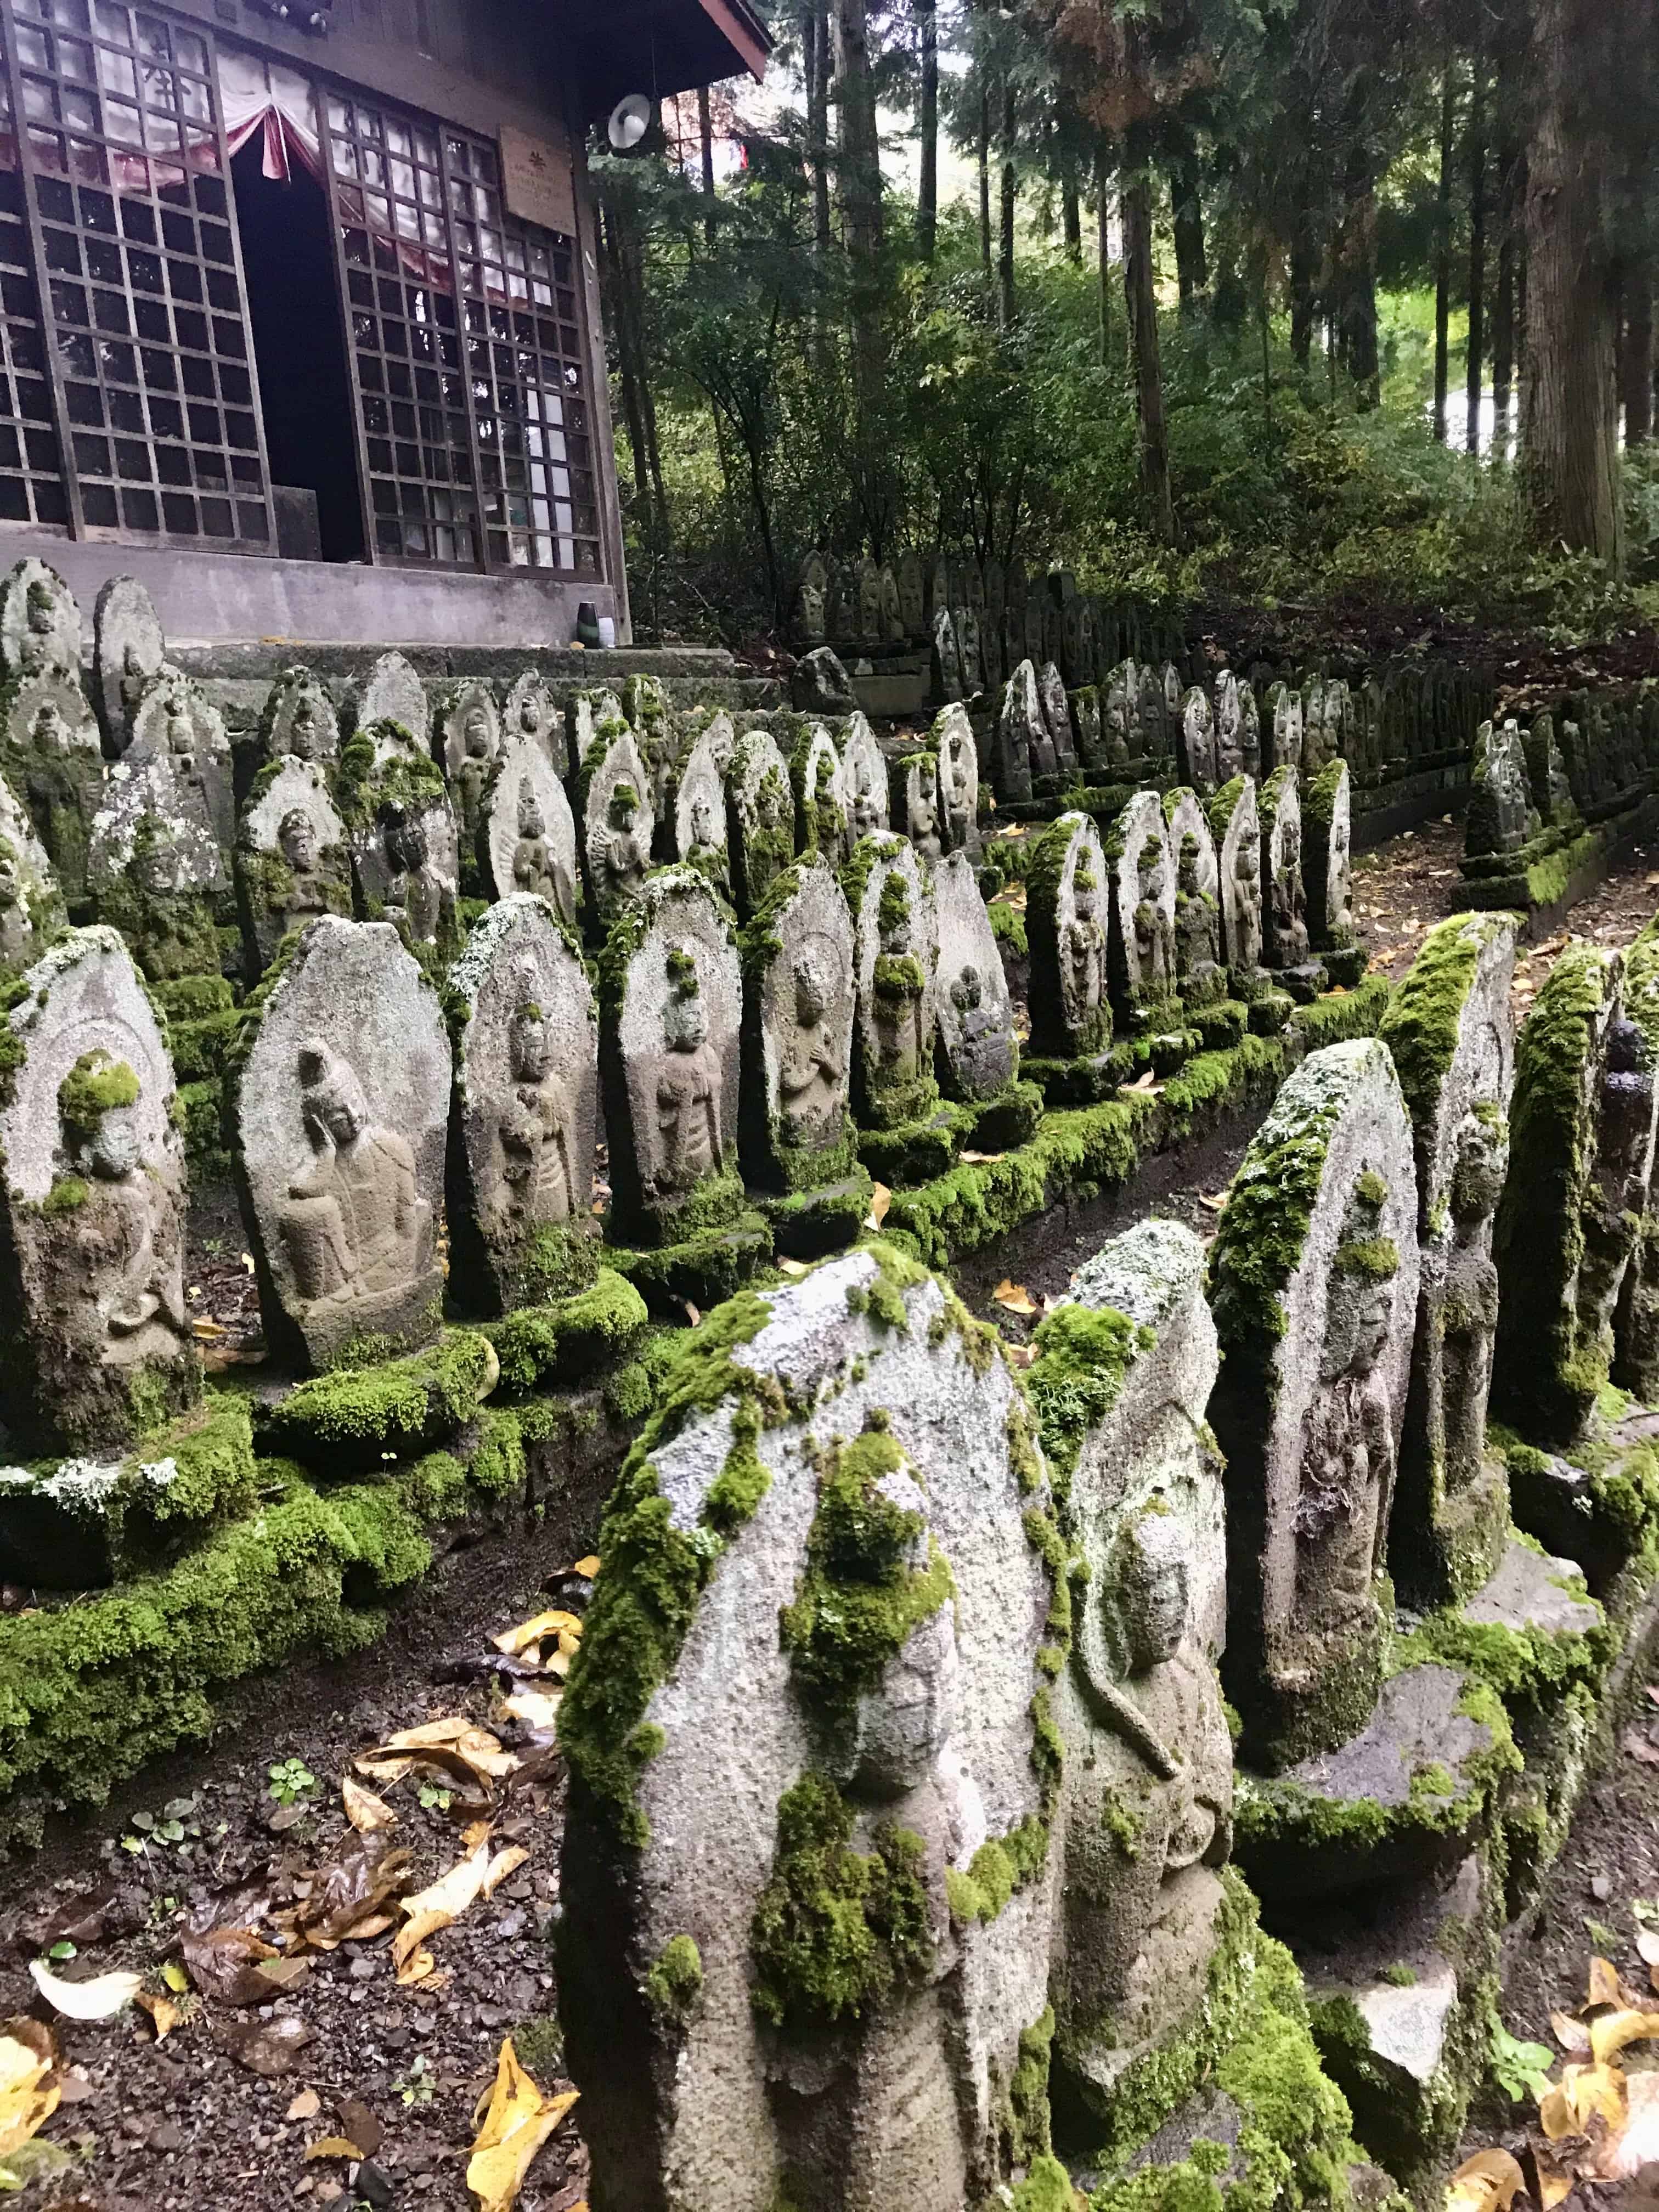 Jizo statues, partially covered in moss, lined up in rows in front of a wooden shrine.